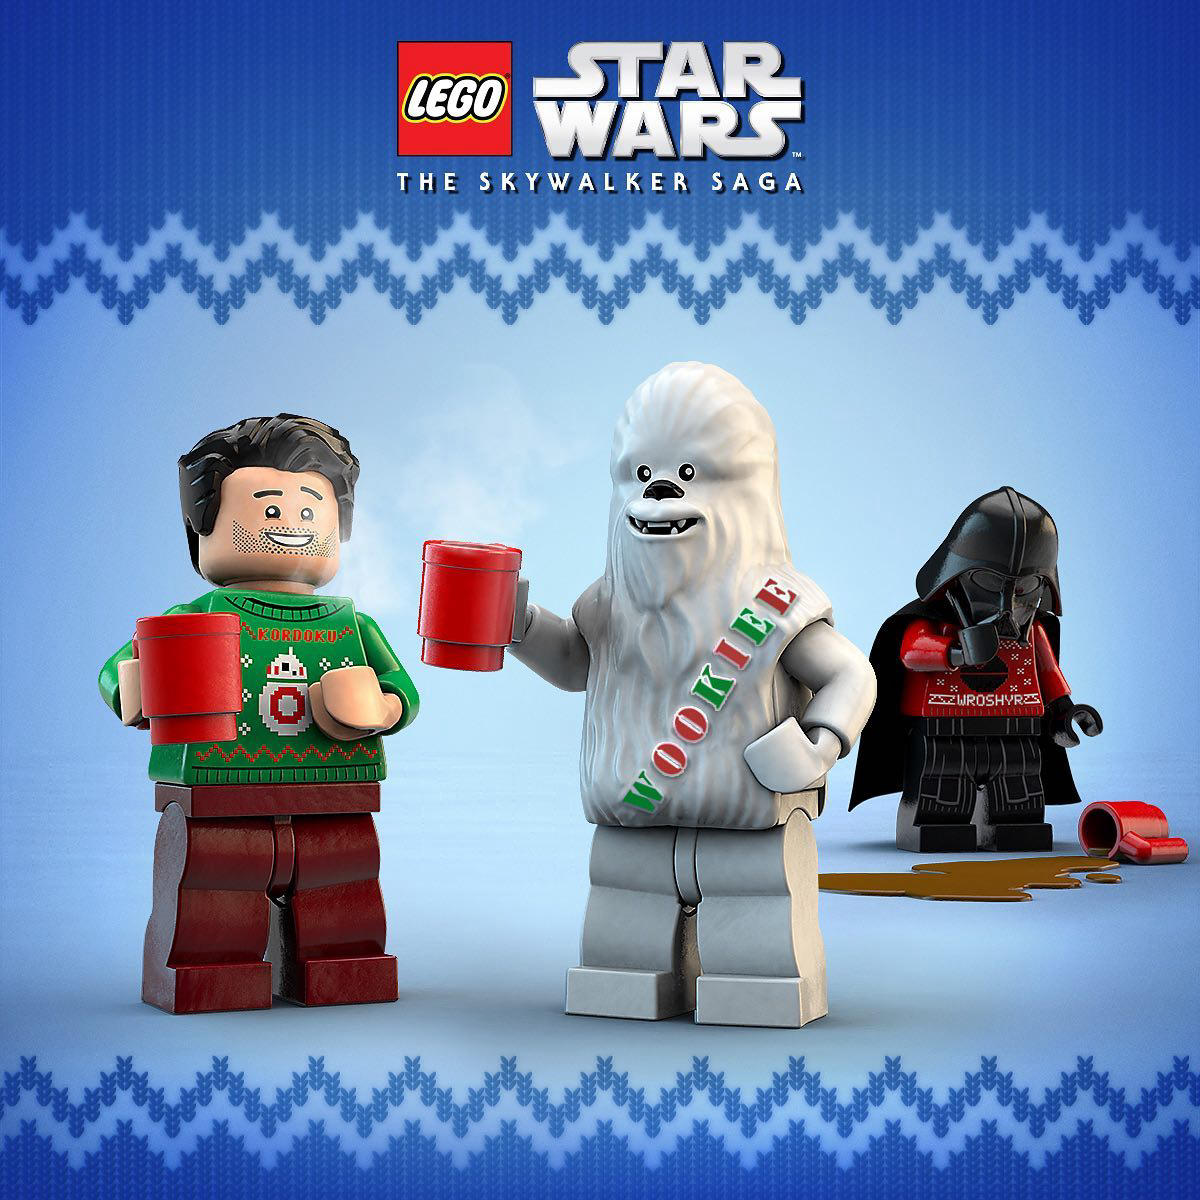 WB Games - A holiday treat from #LEGOStarWarsGame awaits you